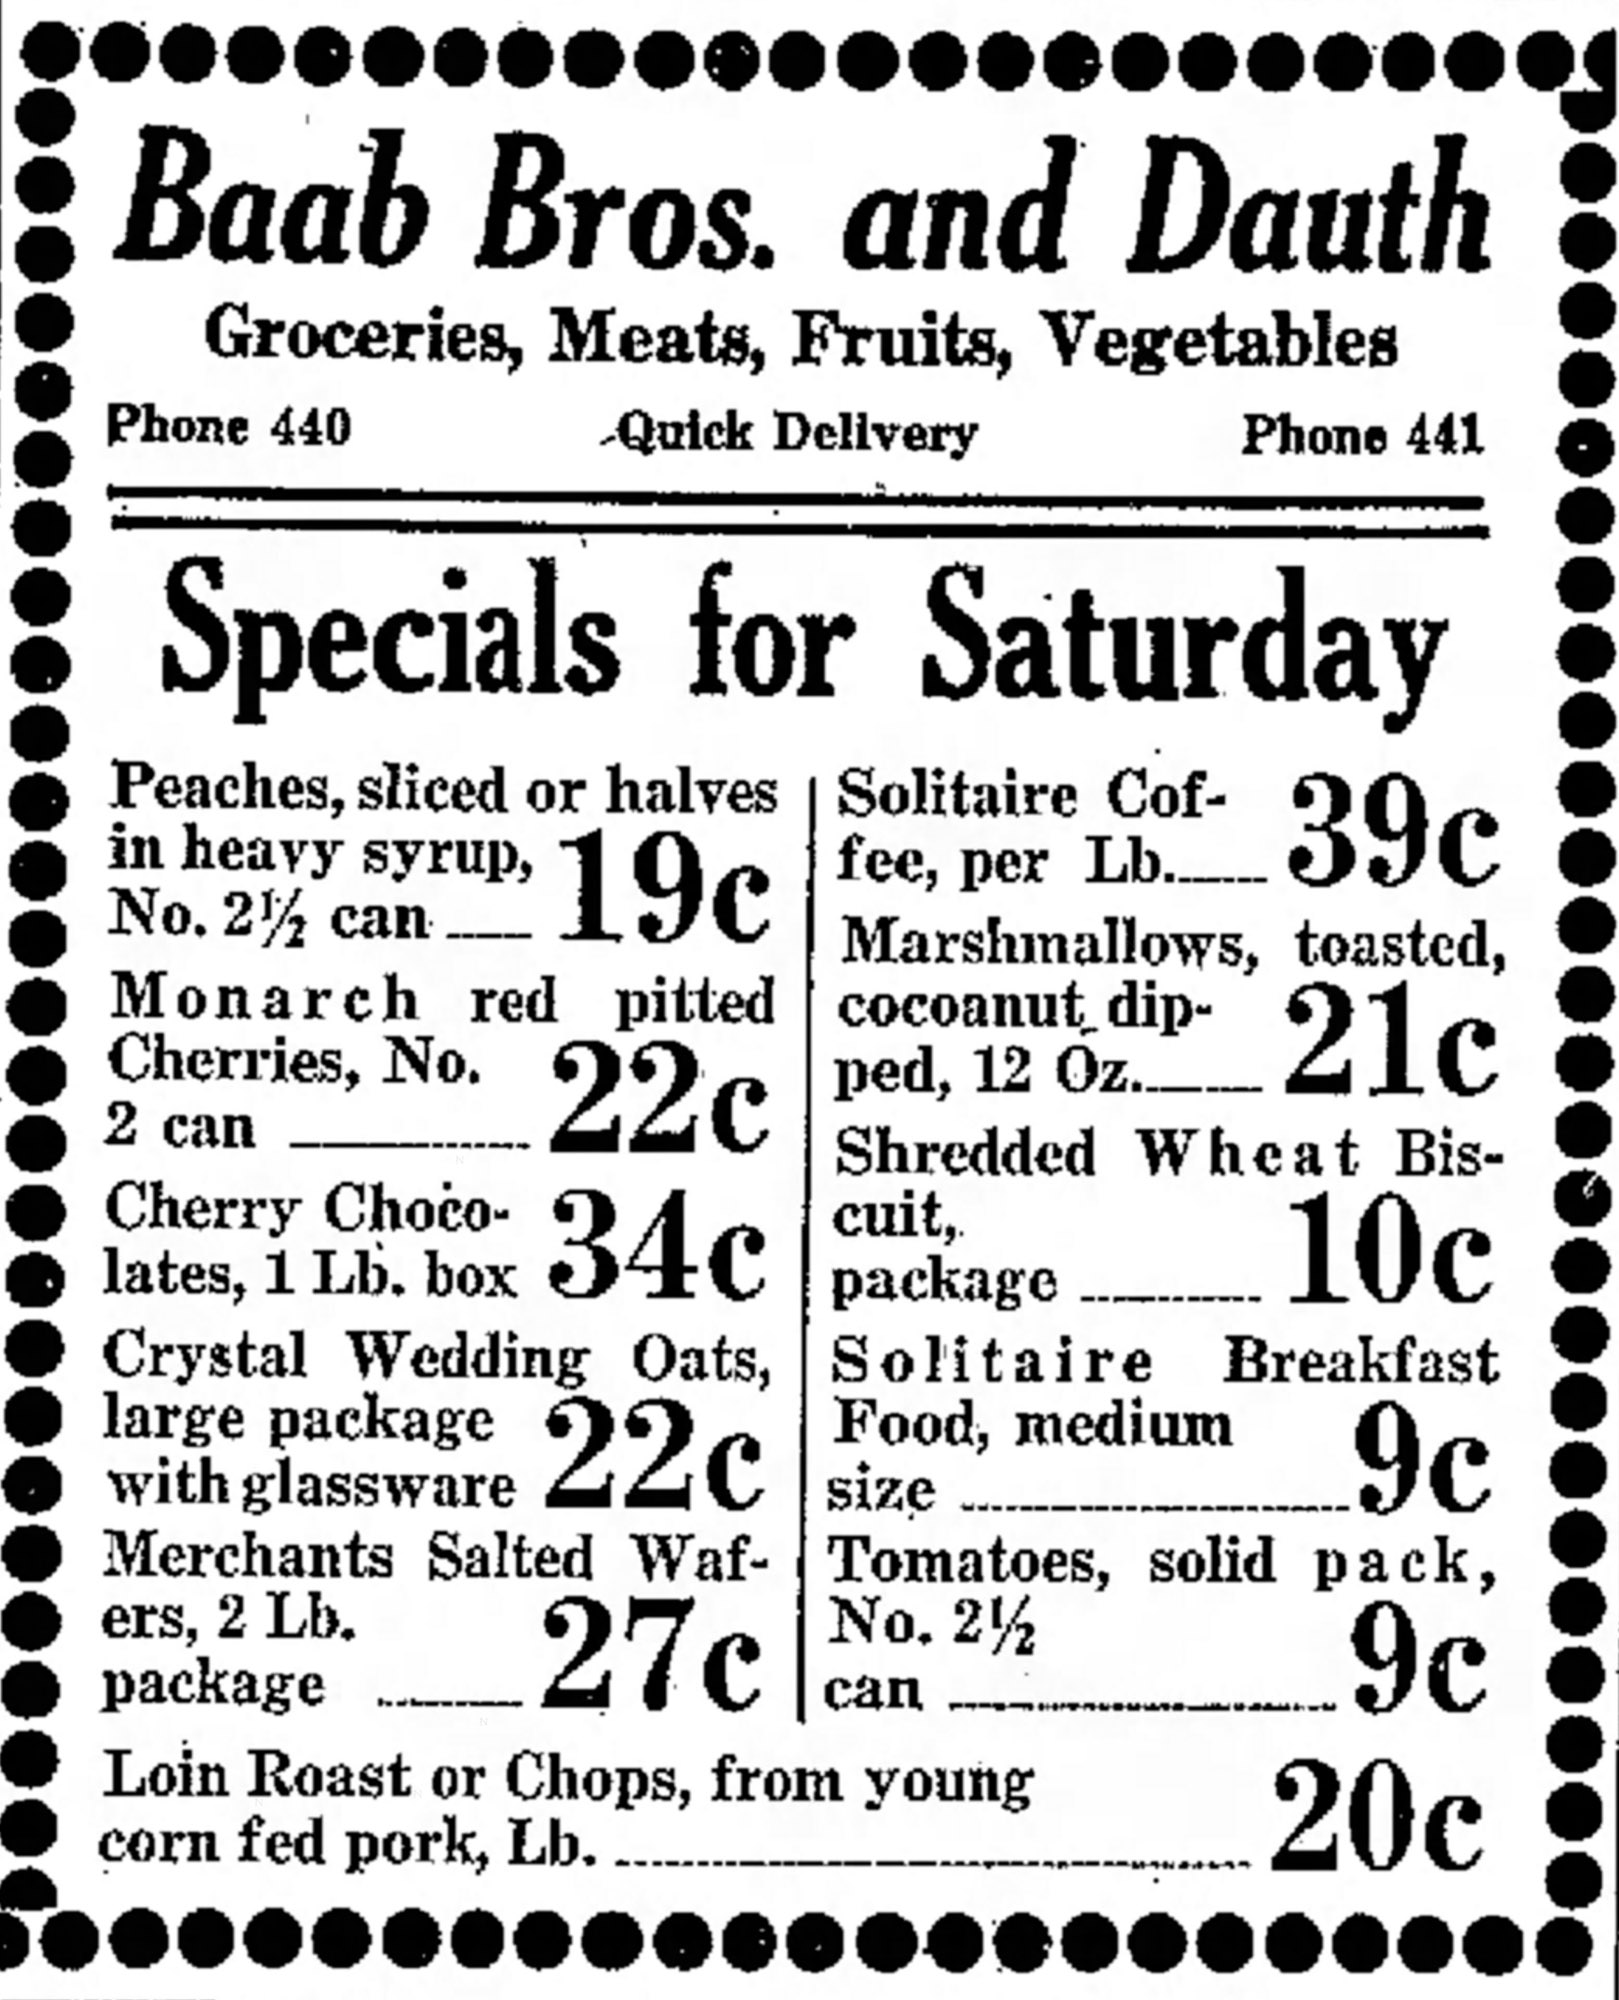 Dauth Family Archive - 1931-10-23 - Greeley Daily Tribune - Baab Bros and Dauth Advertisement